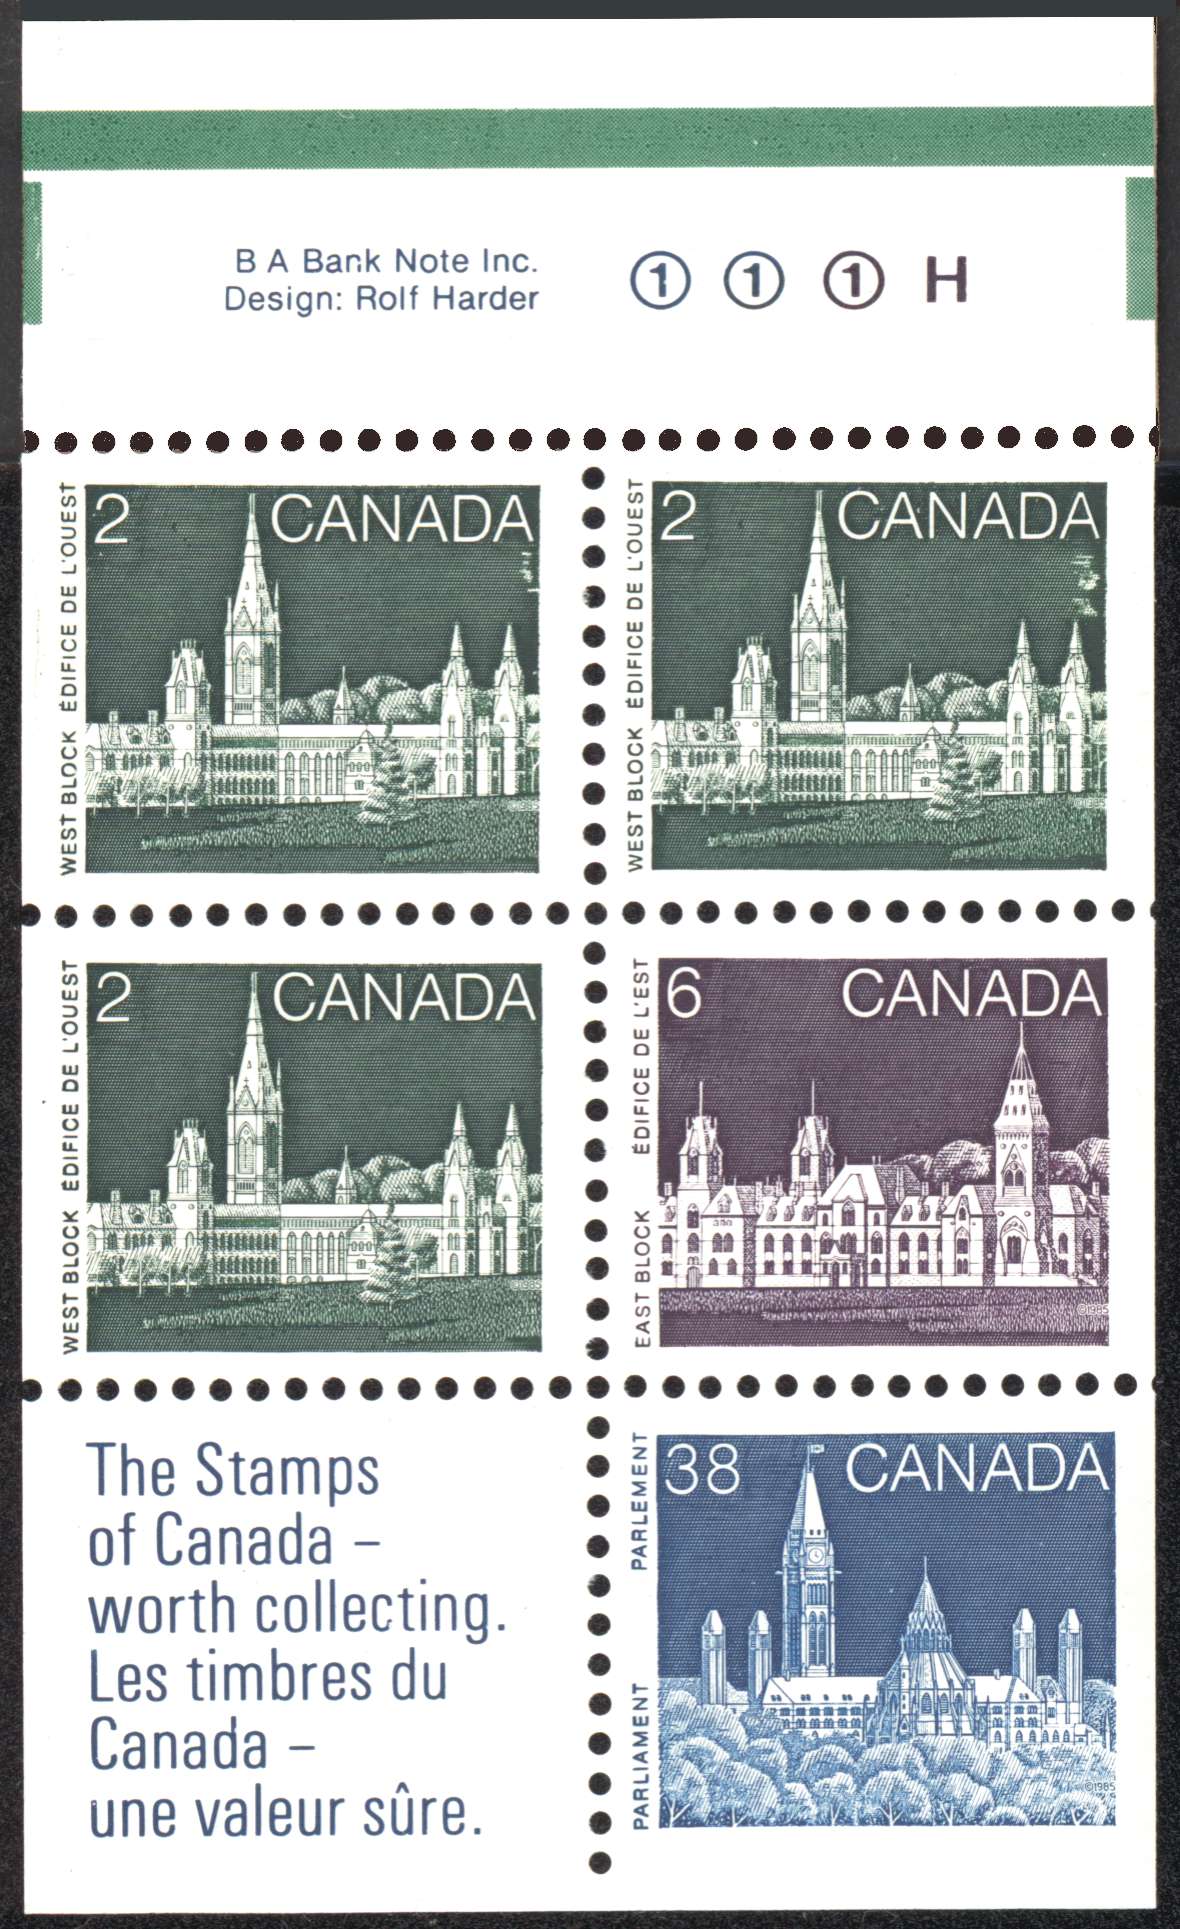 1989 50 cent booklet pane containing
                        three 2 cent, one 6 cent, and one 38 cent stamps